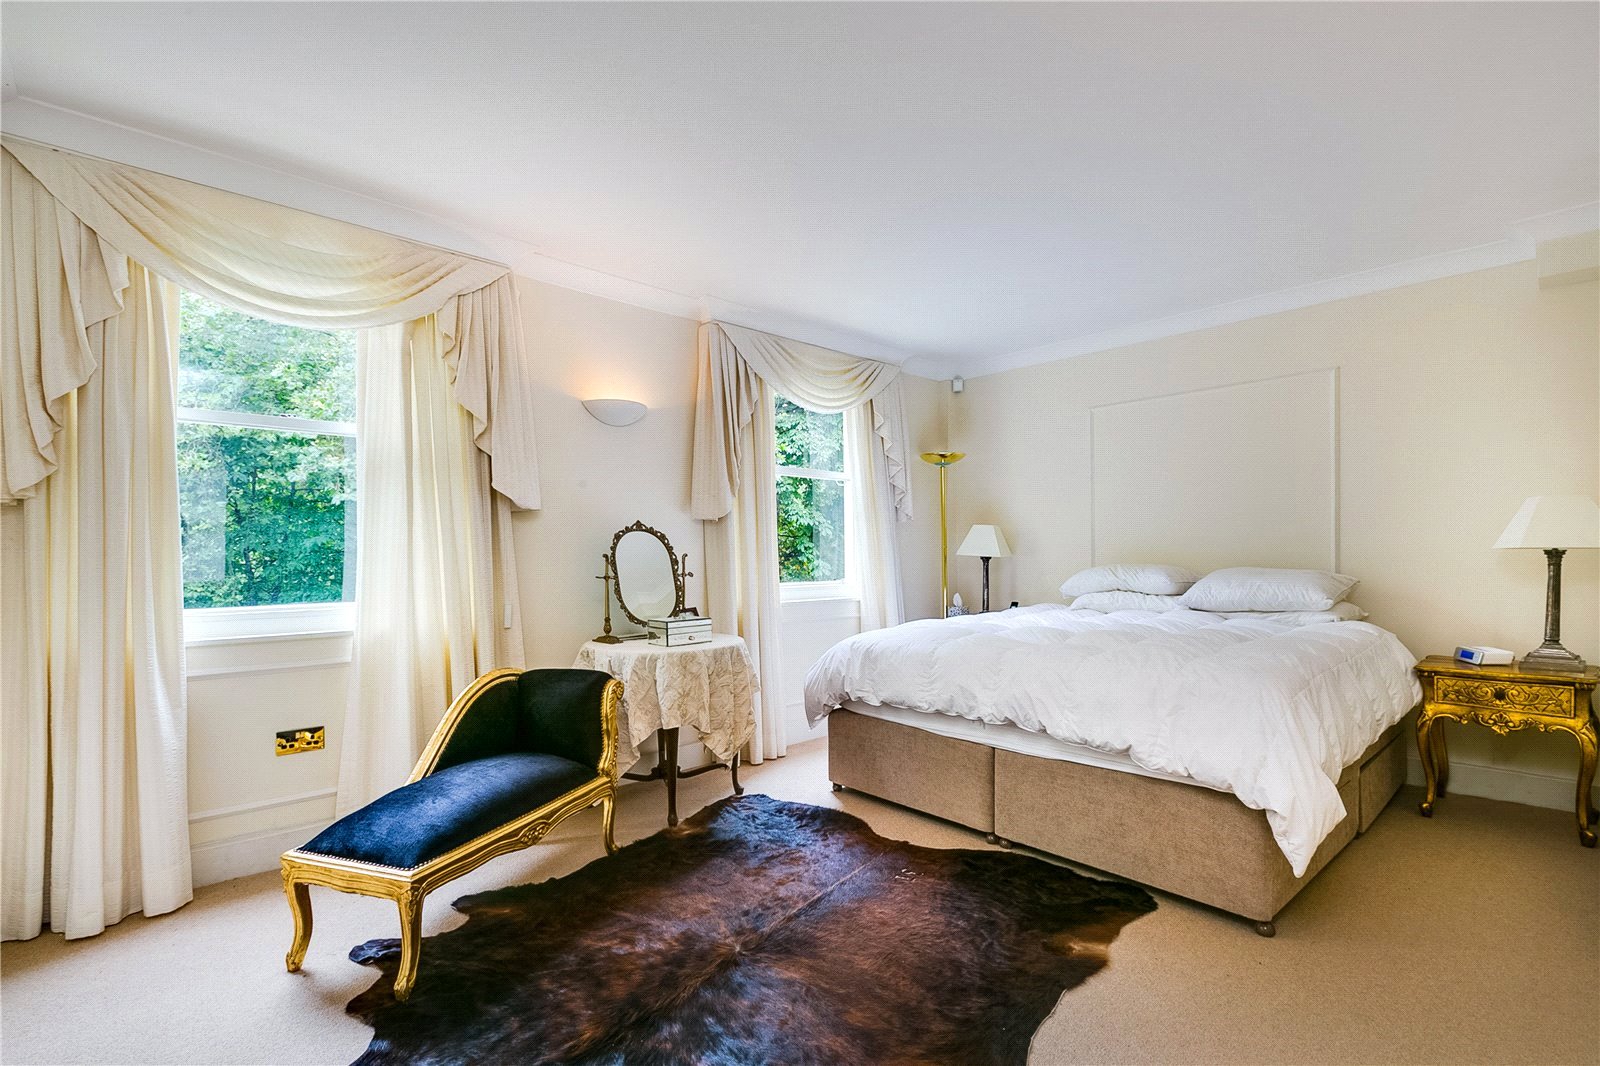 Lovelydays Luxury Rentals introduce Stanhope Gardens house in the center of London.